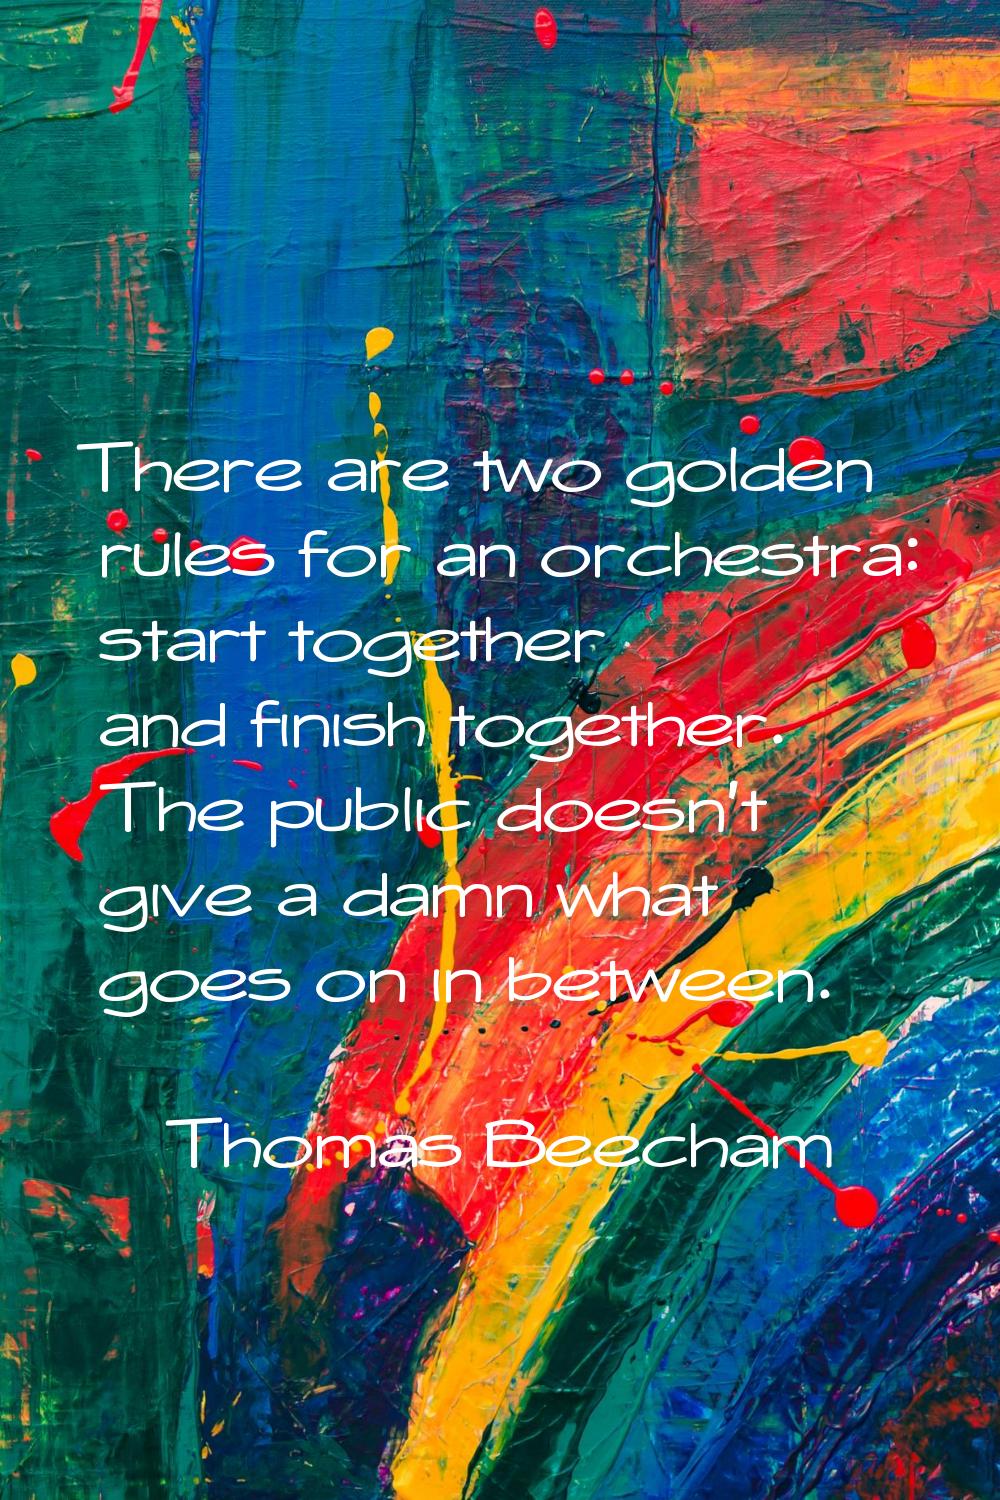 There are two golden rules for an orchestra: start together and finish together. The public doesn't